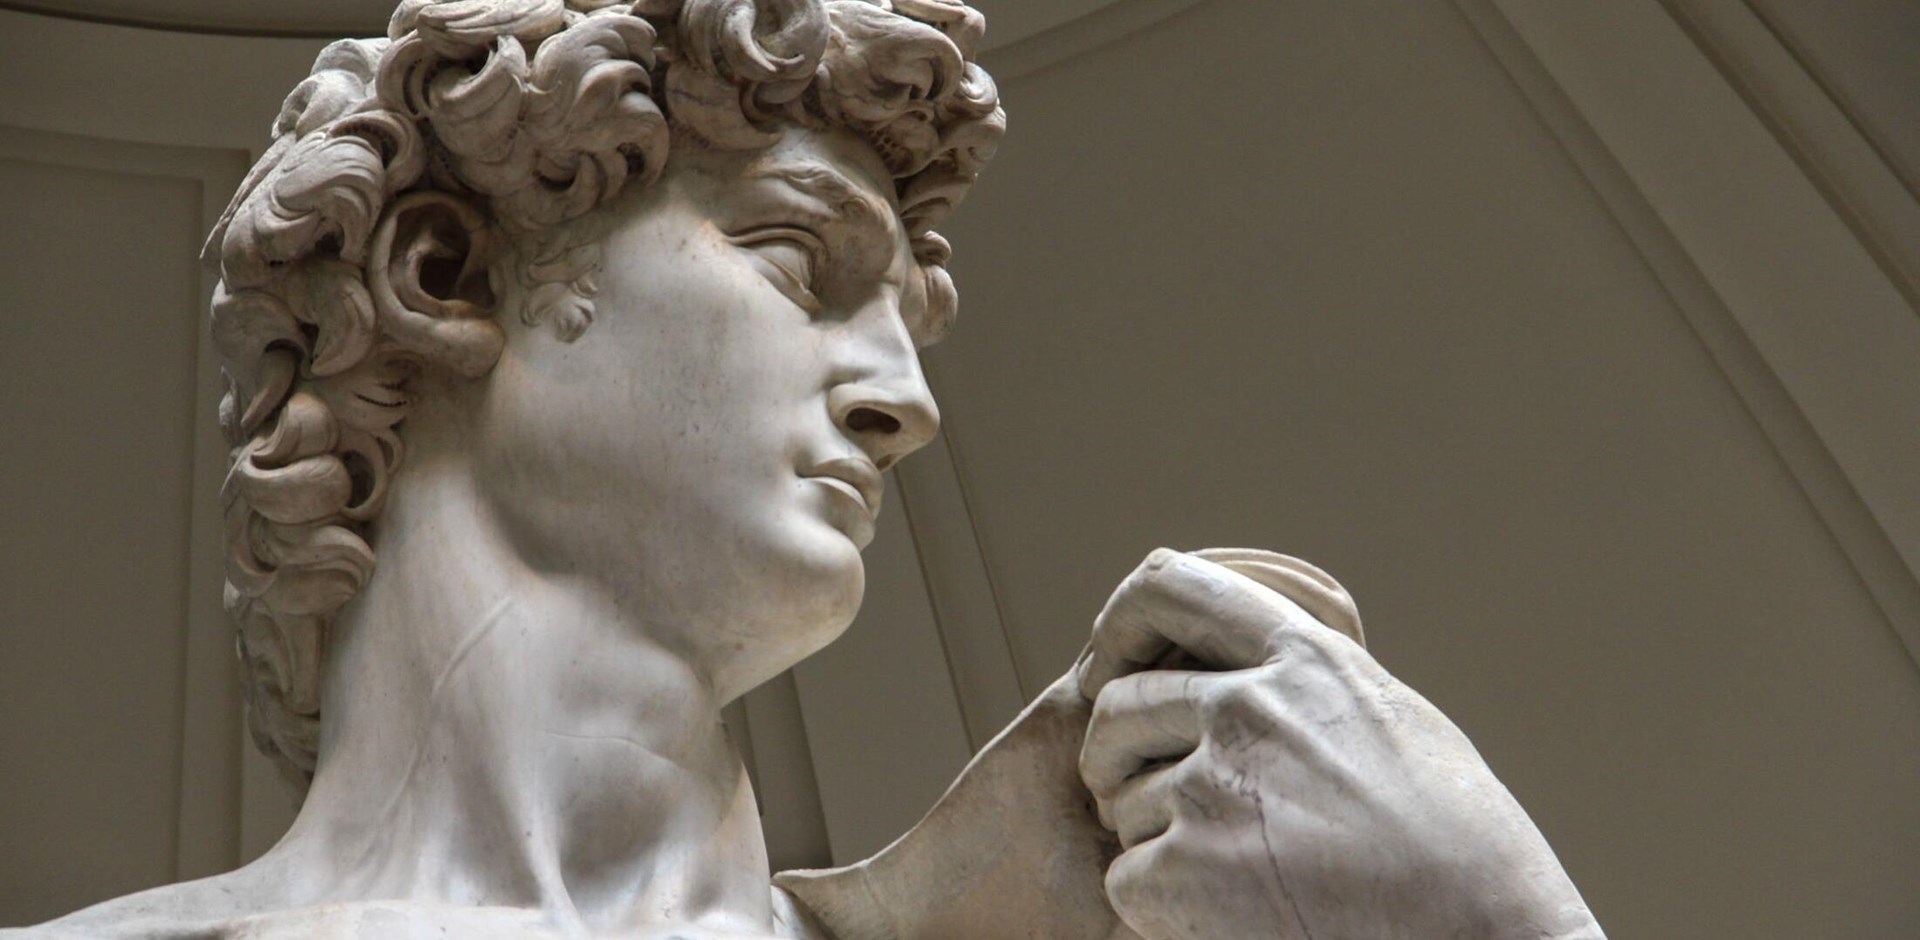 Close Up of Statue of David of Michelangelo in Accademia Gallery of Florence, Galleria dell'Accademia, Italy